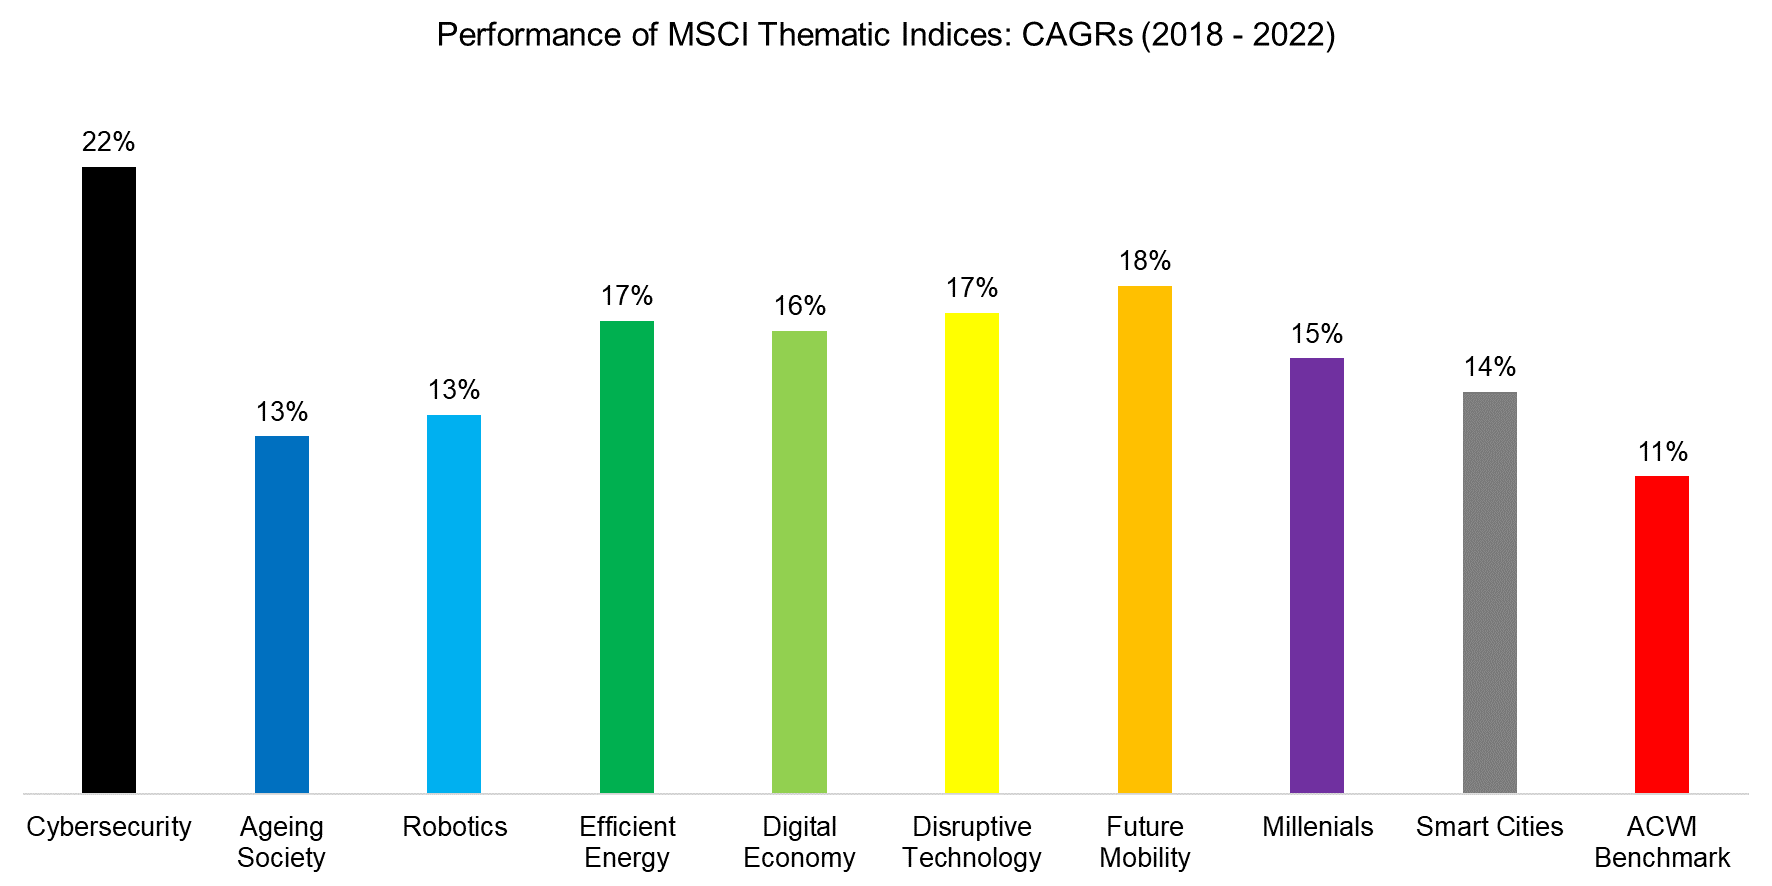 Performance of MSCI Thematic Indices CAGRs (2018 - 2022)